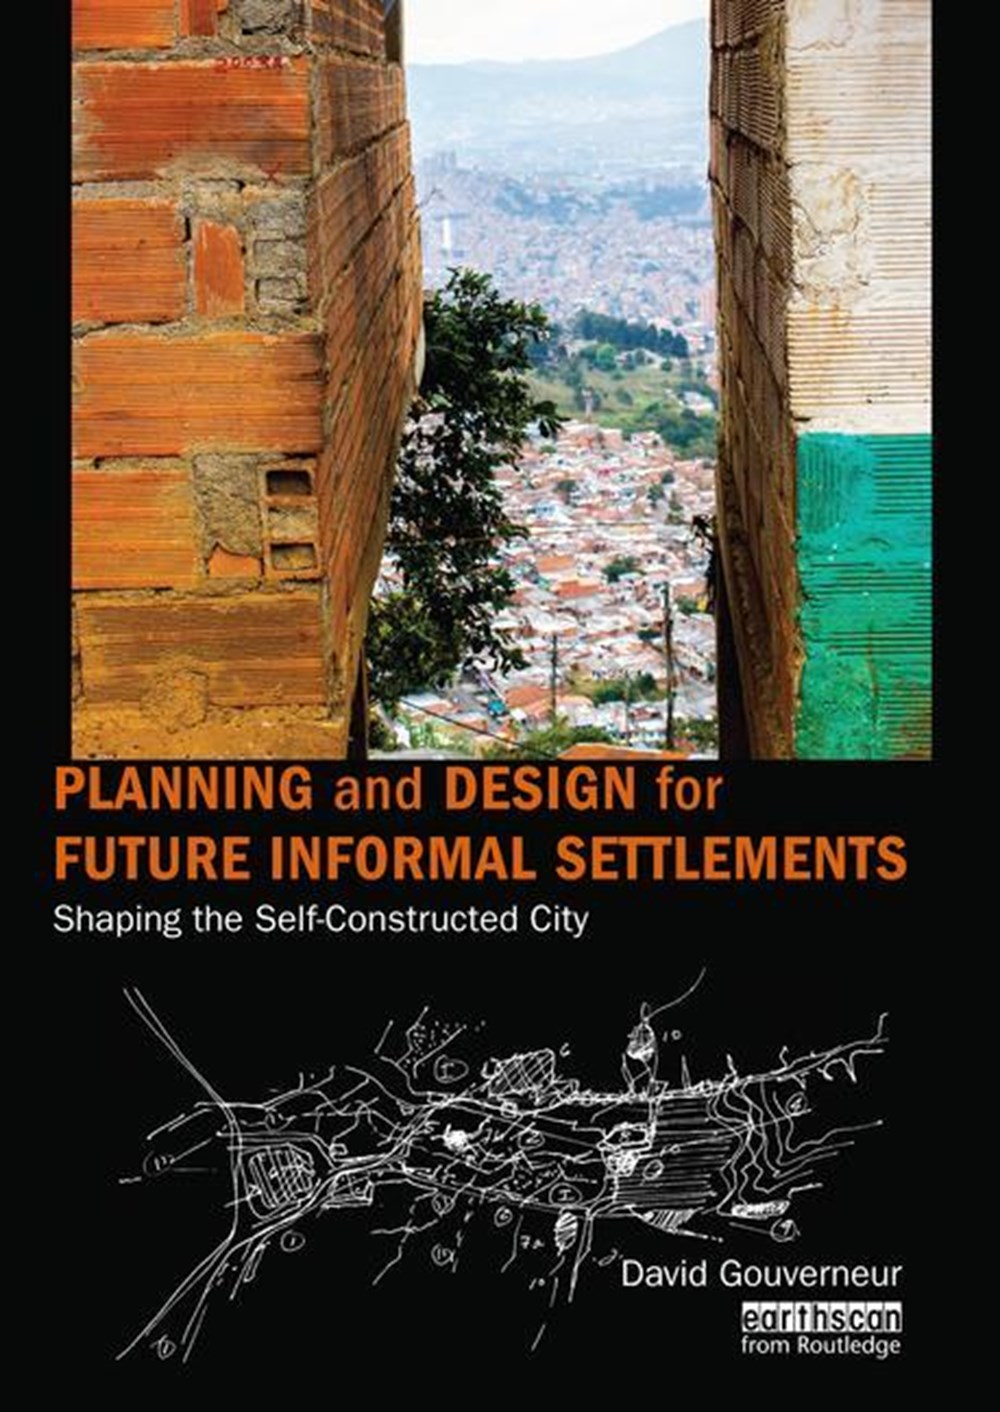 Planning and Design for Future Informal Settlements: Shaping the Self-Constructed City